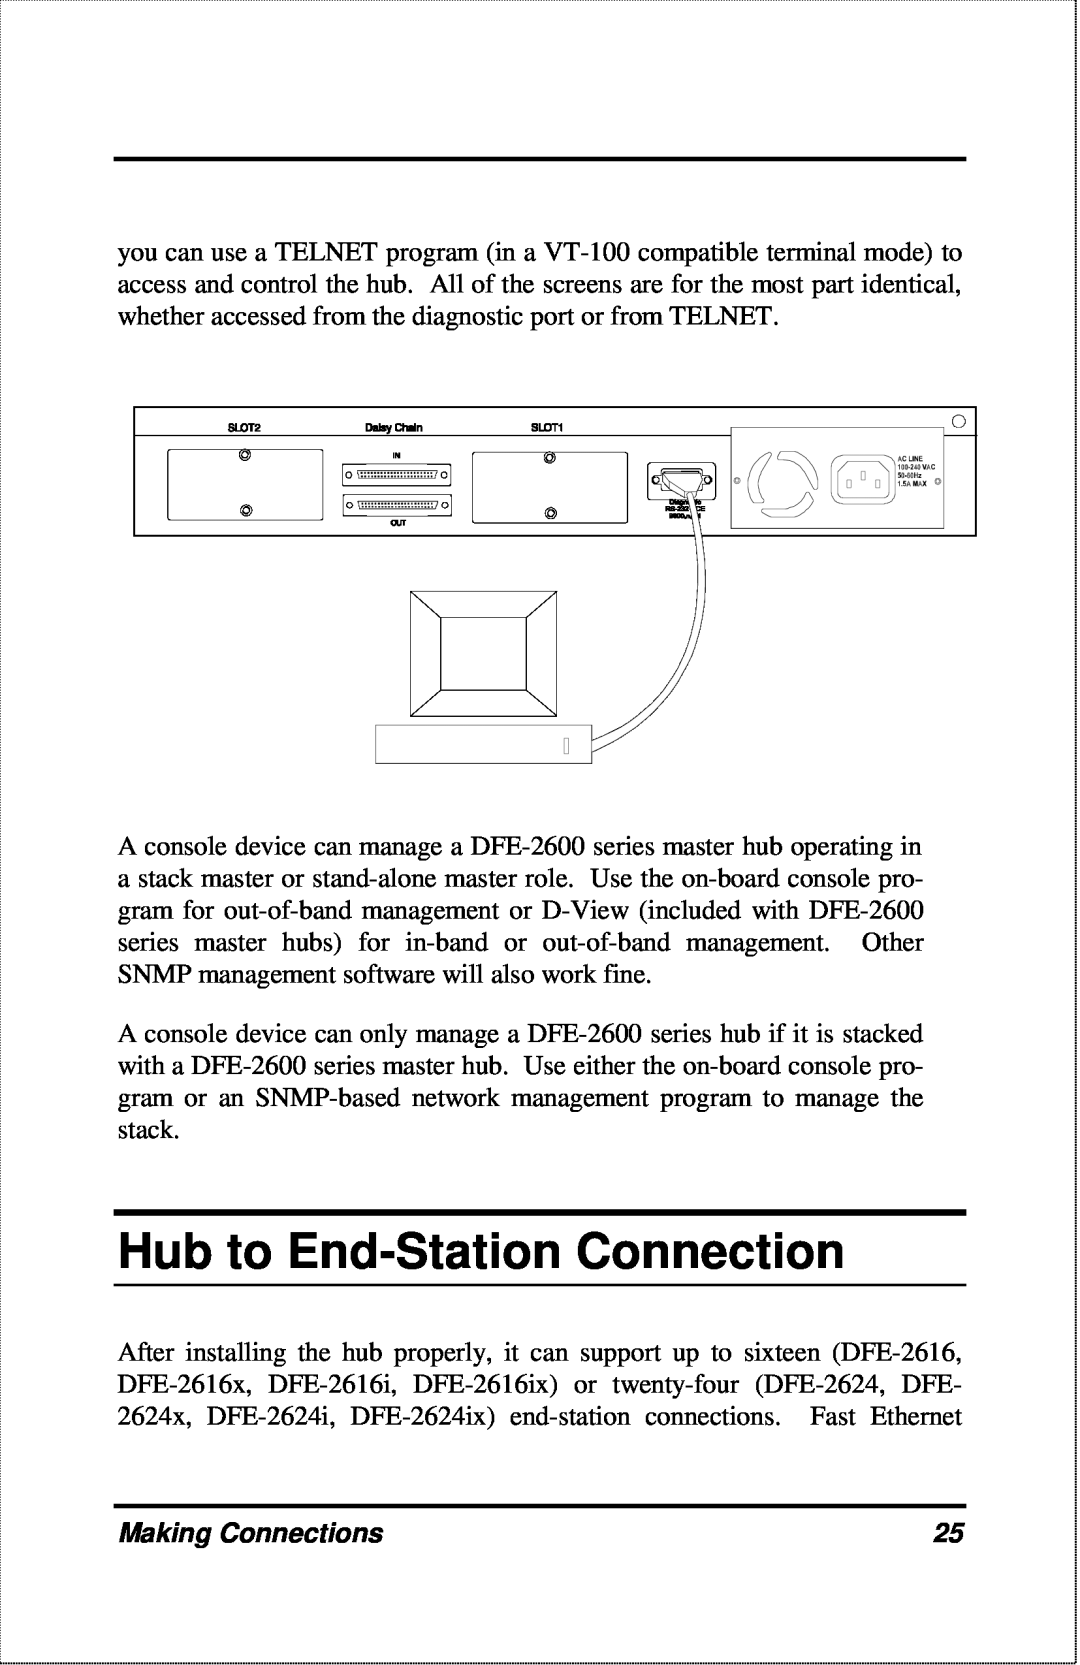 D-Link DFE-2600 manual Hub to End-Station Connection, Making Connections 